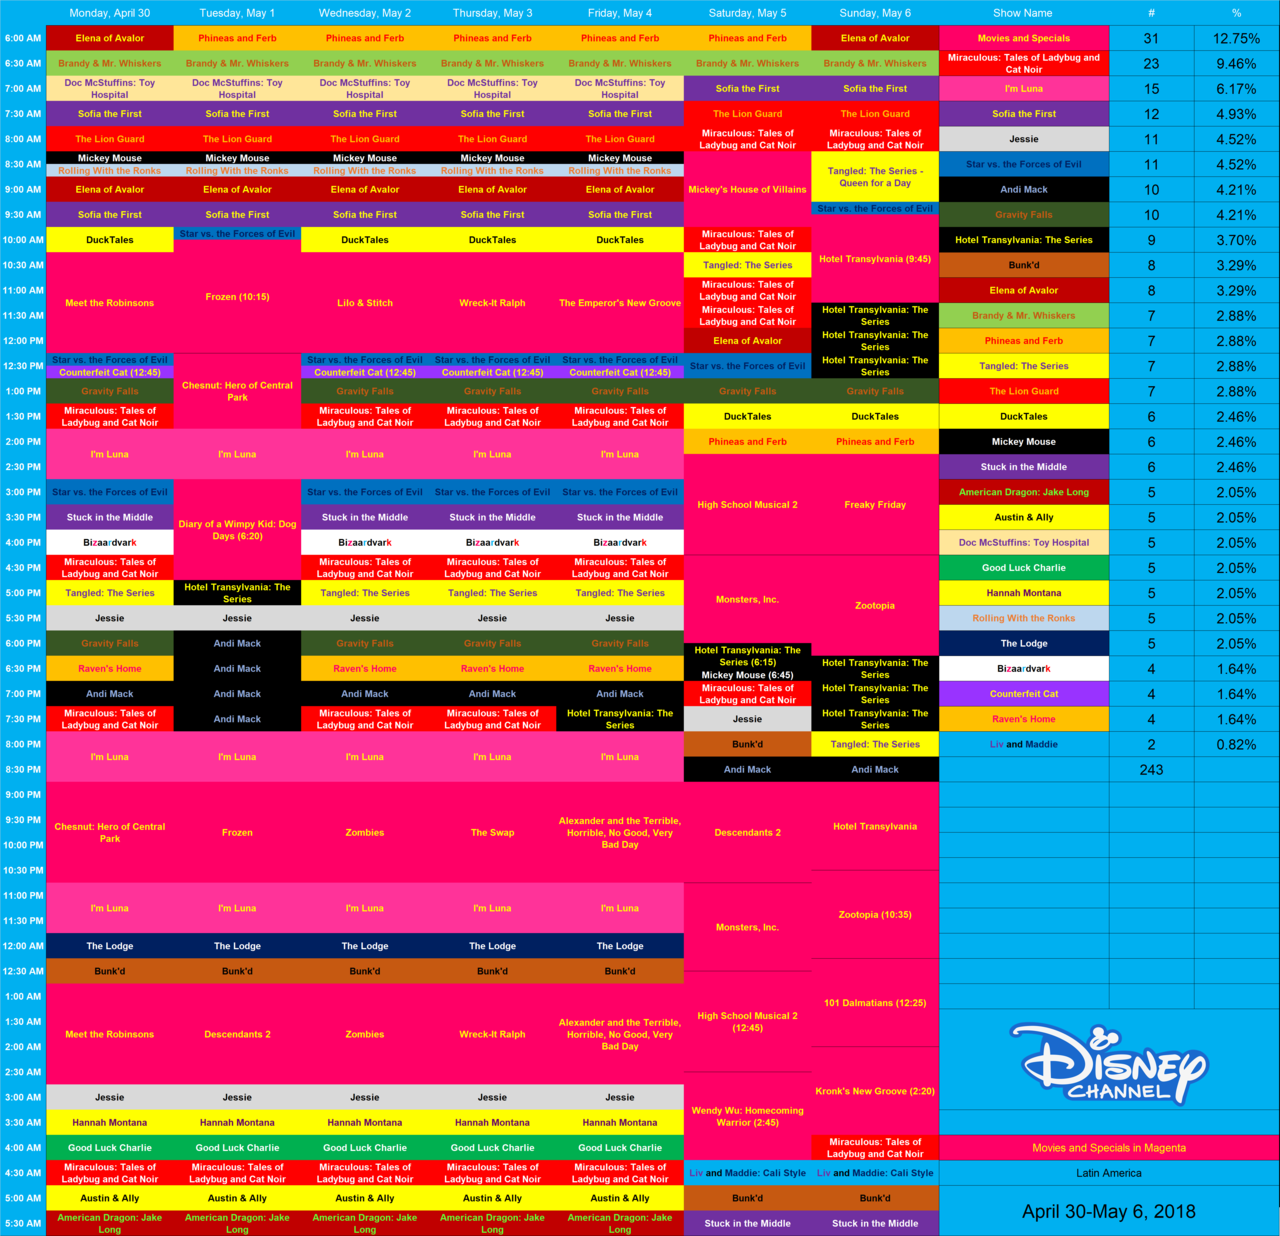 Disney Schedule Thread and Archive — Just for Fun, this